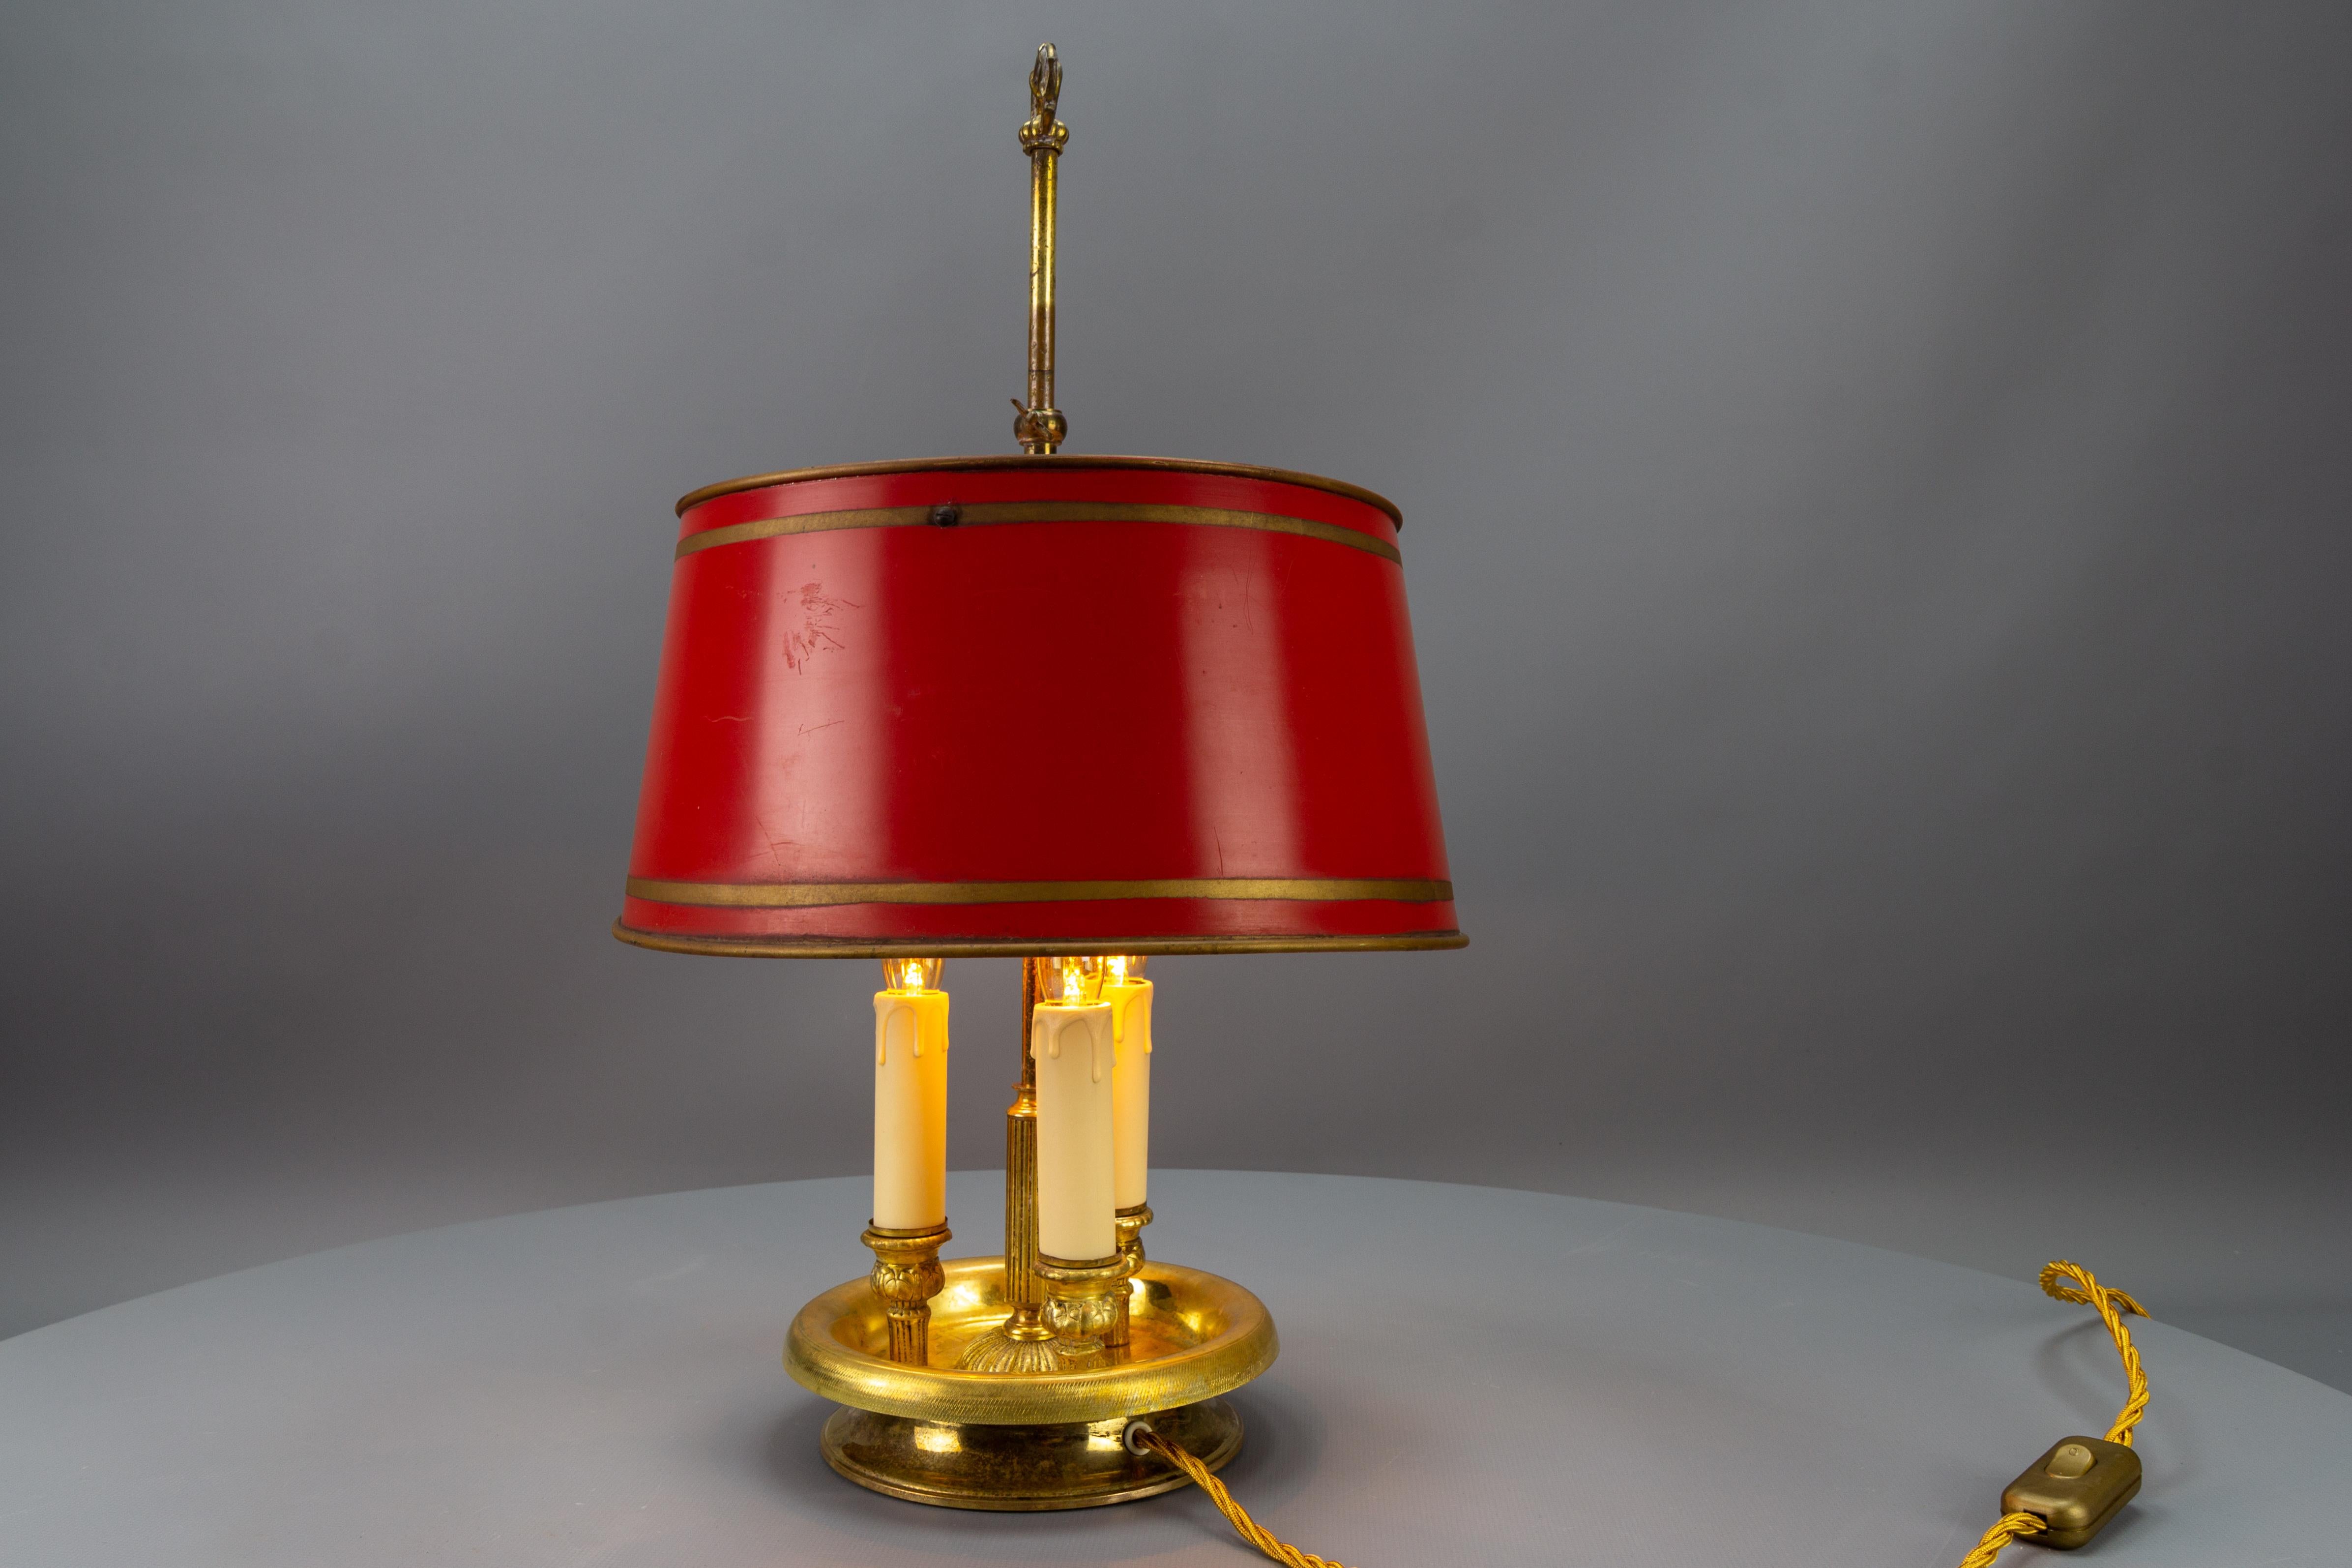 French brass and red tole shade three-light bouillotte desk or table lamp from circa 1950.
This beautiful three-arm / thre-light bouillotte table lamp features a fluted center column with an ornate base and an adjustable red-painted tole lampshade